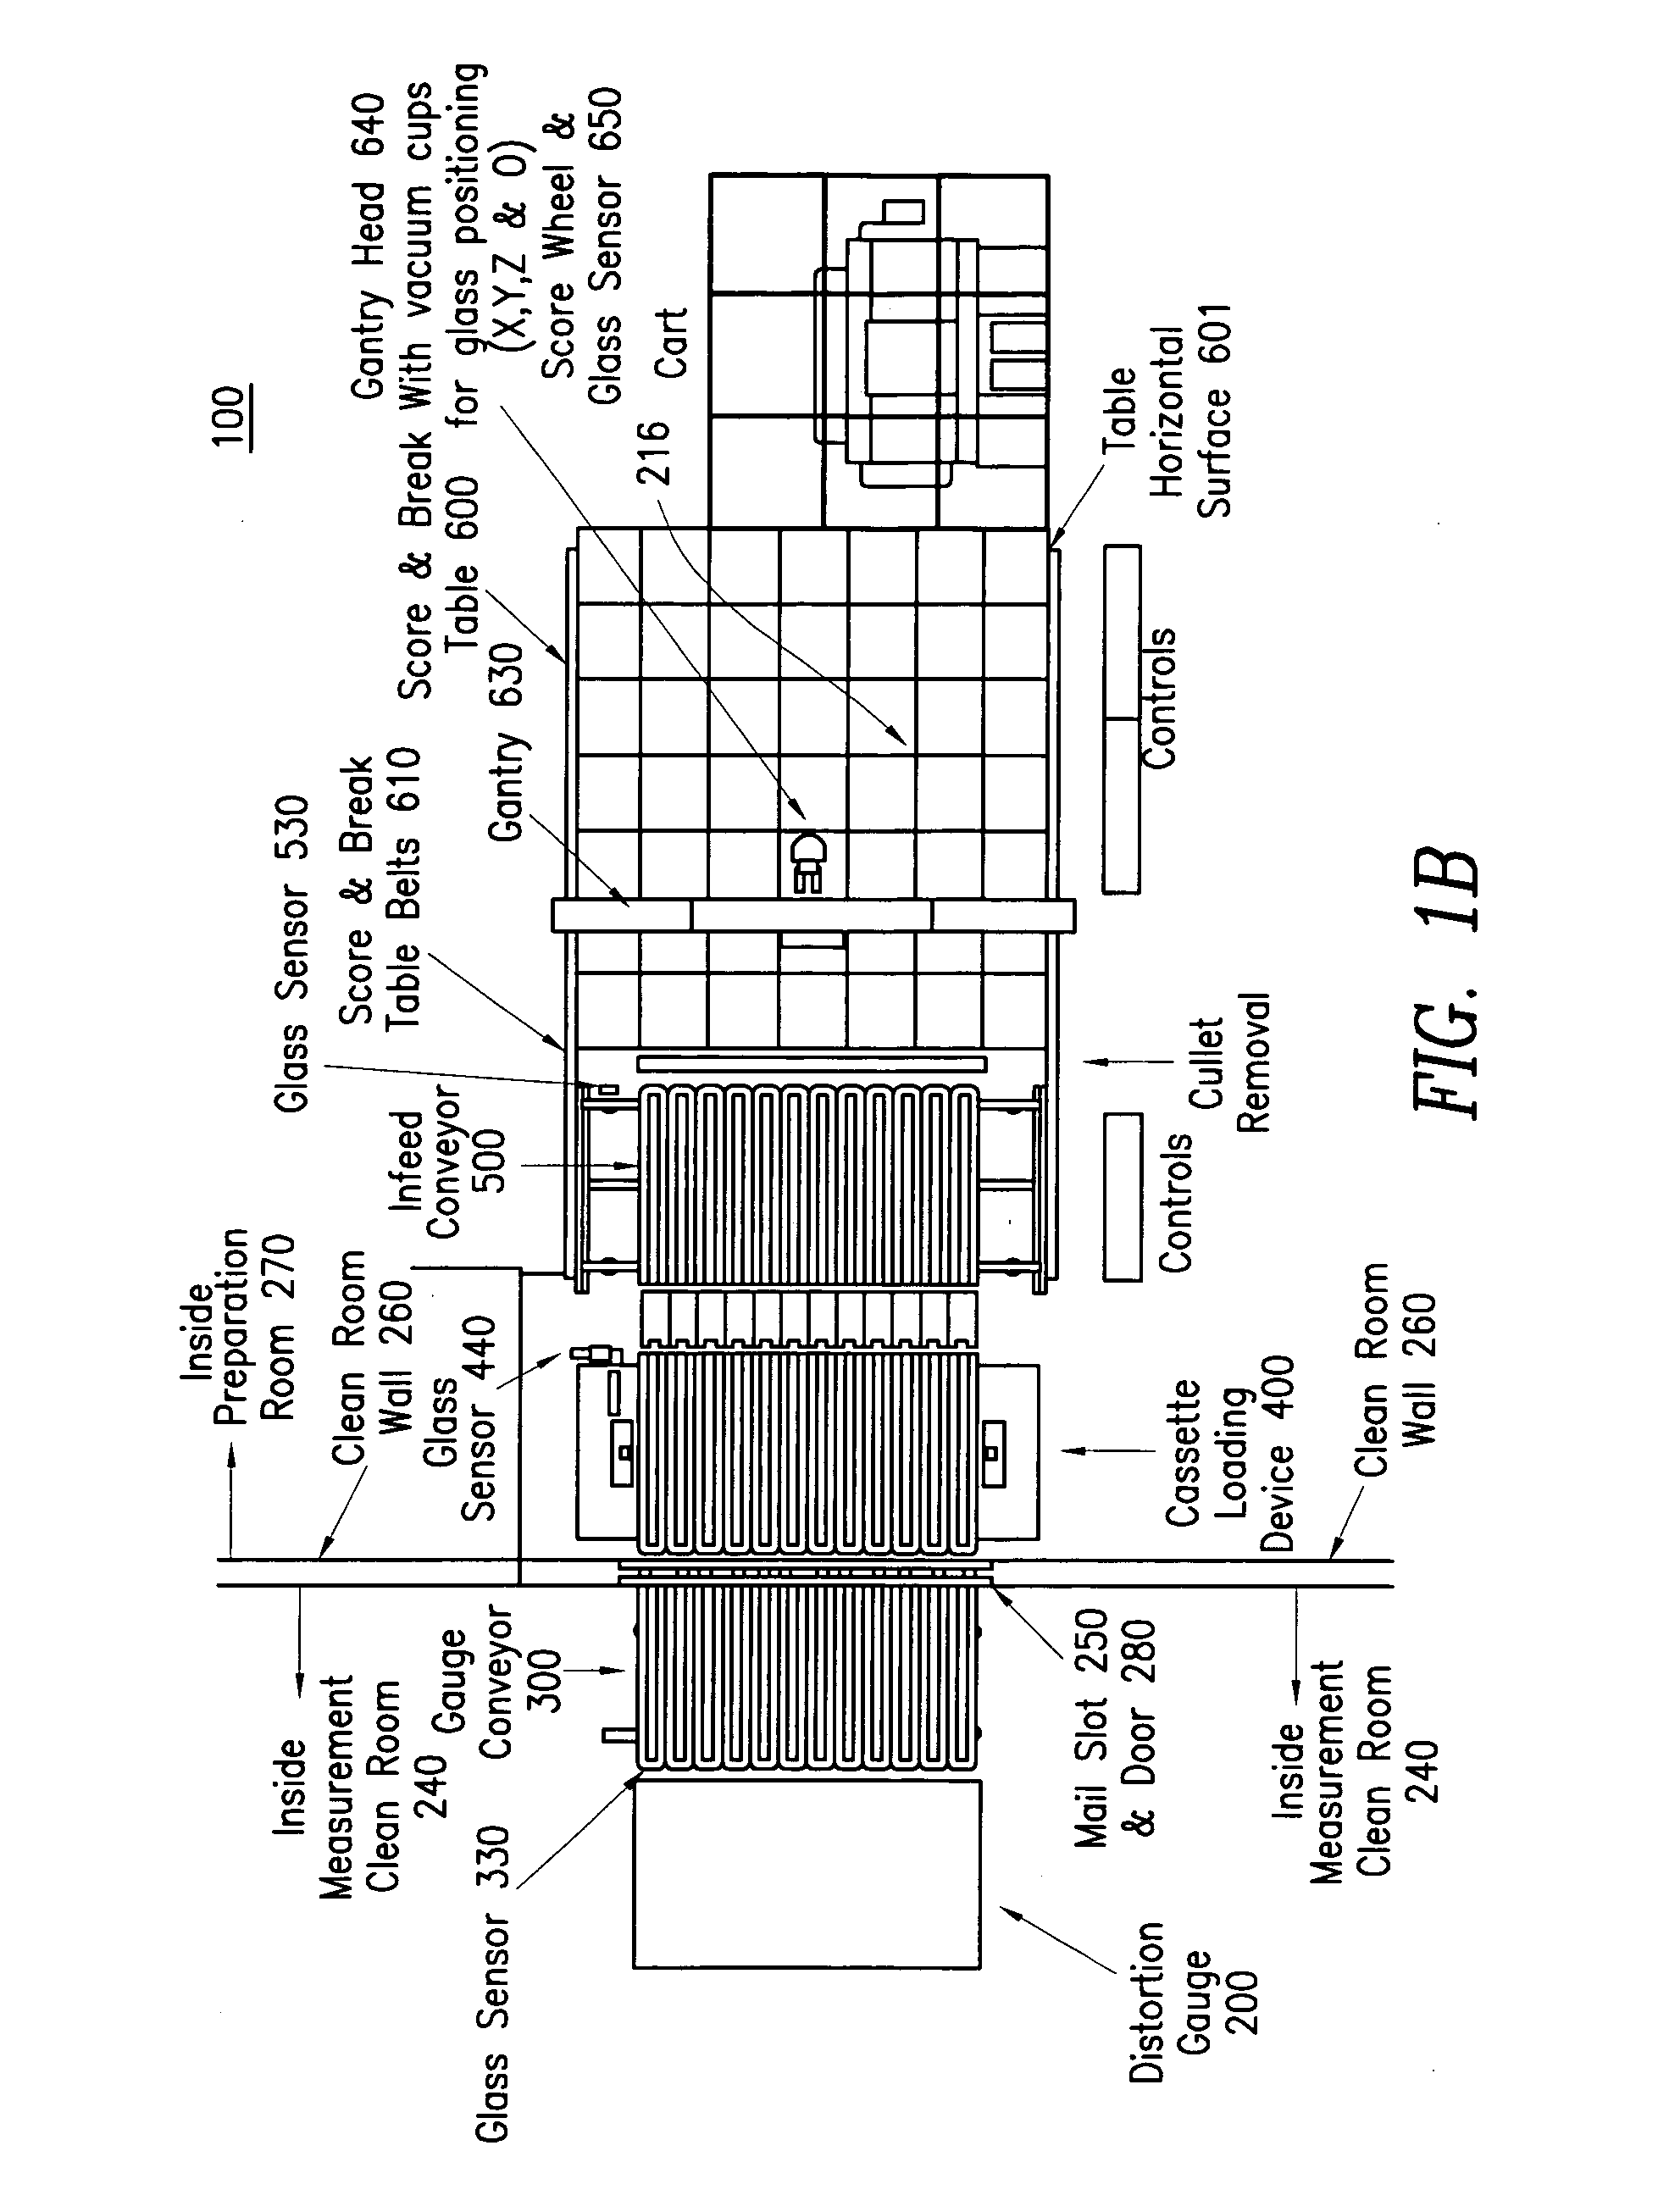 Glass handling and processing system